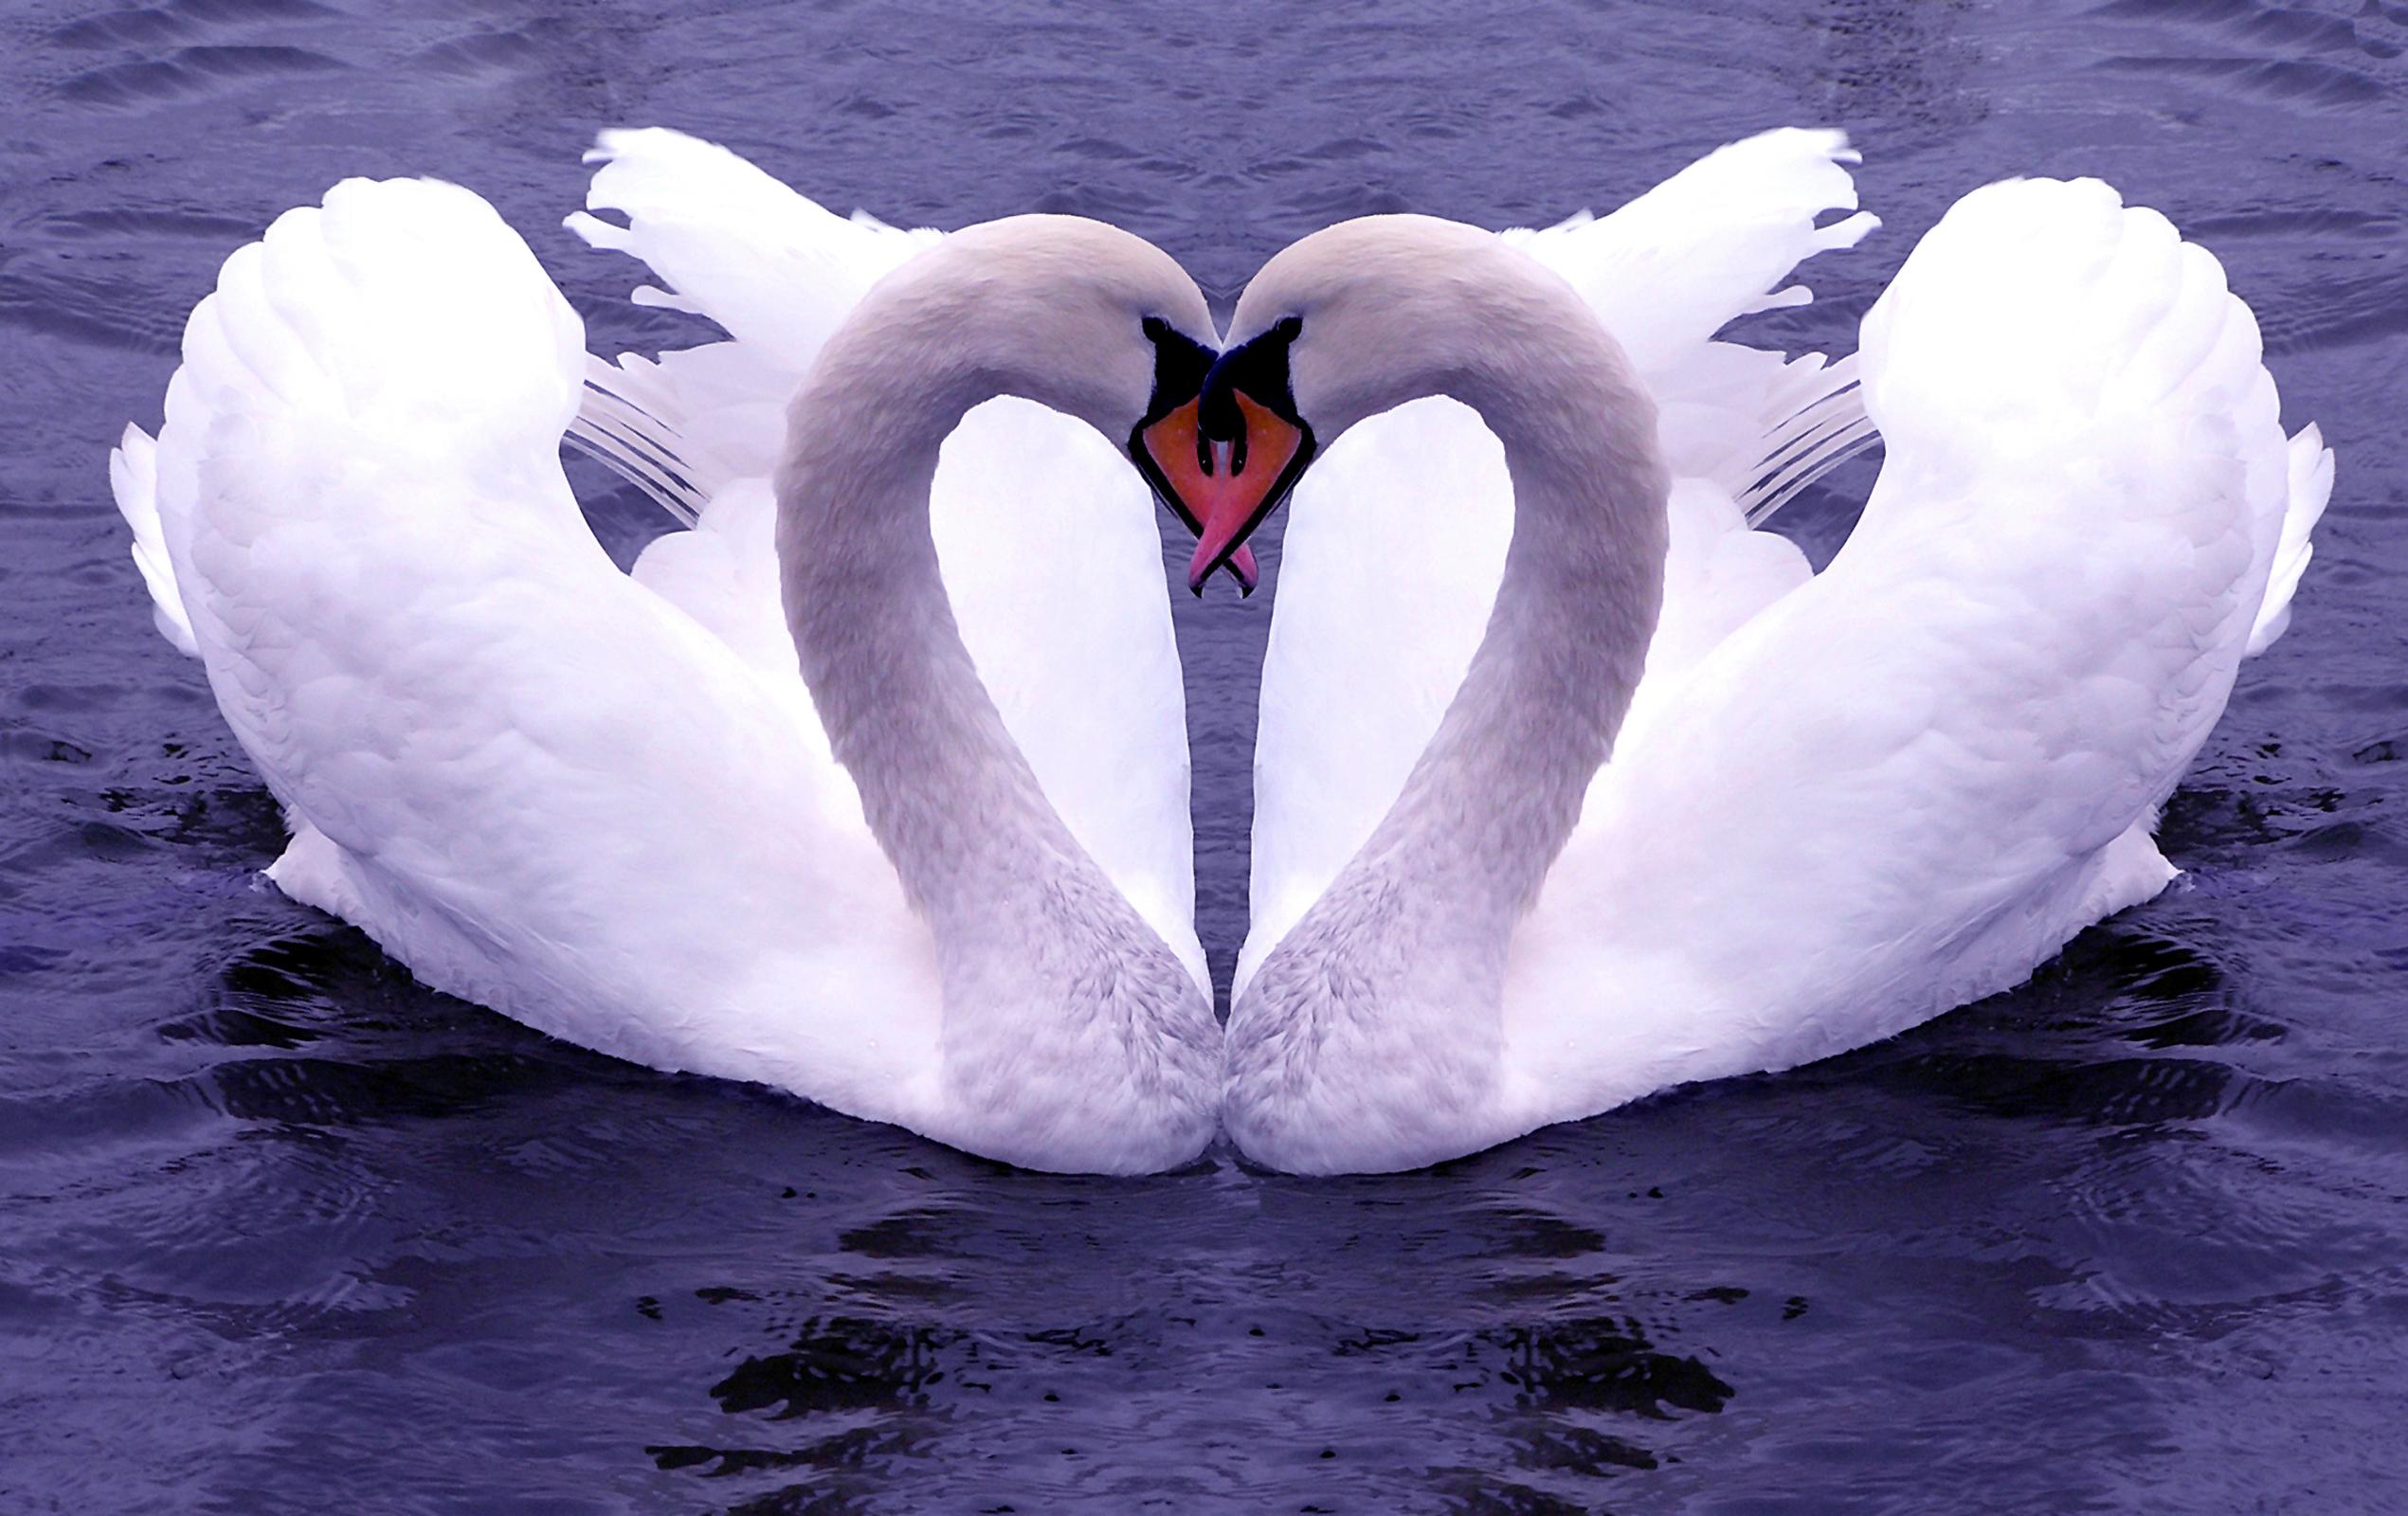 You are viewing the animals swans wallpaper named 